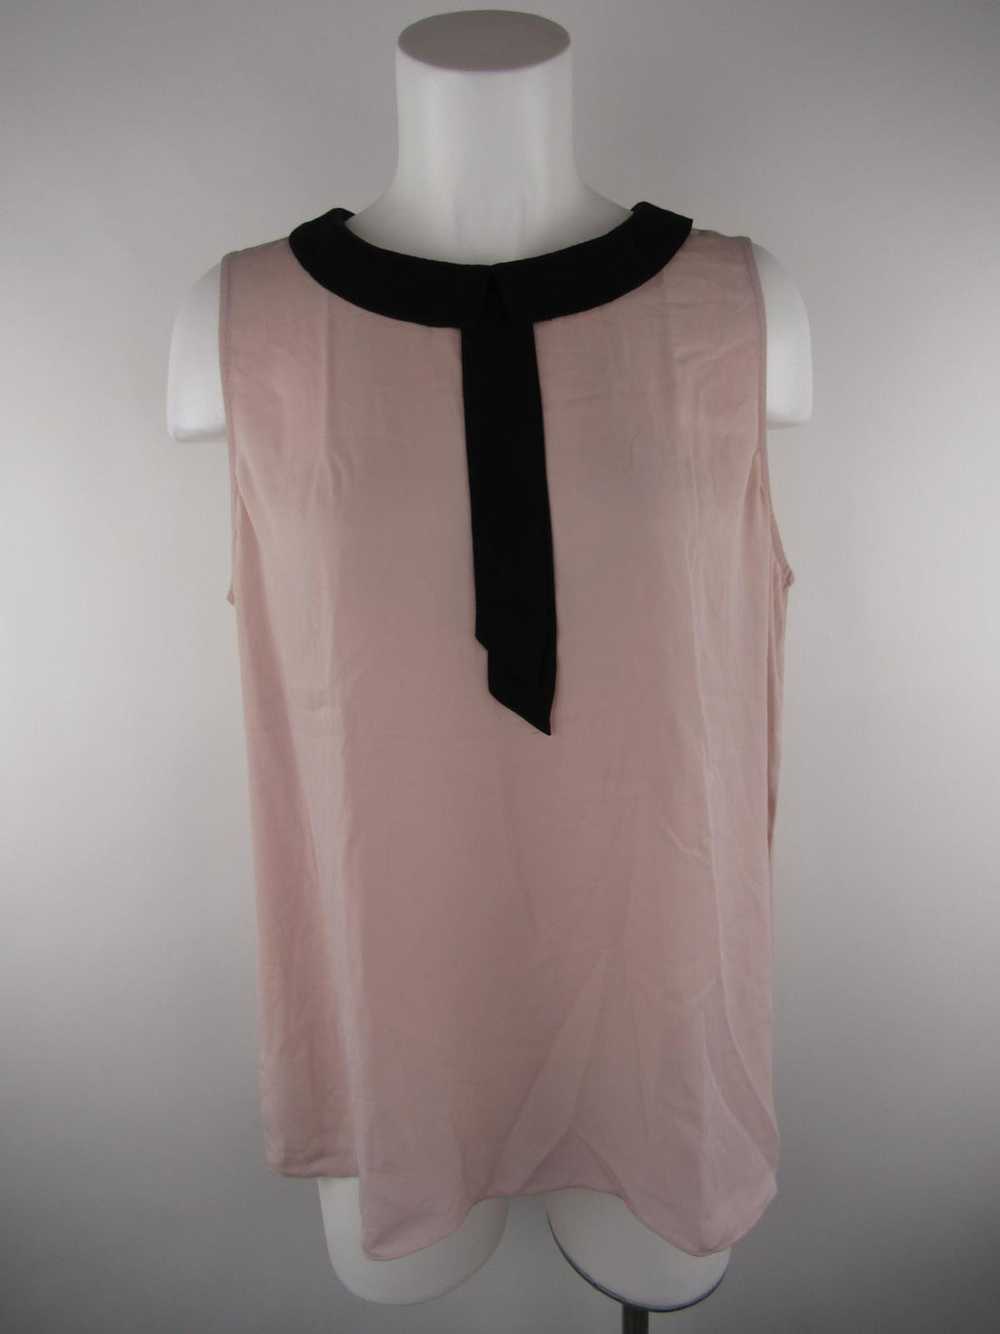 Vince Camuto Blouse Top - image 1